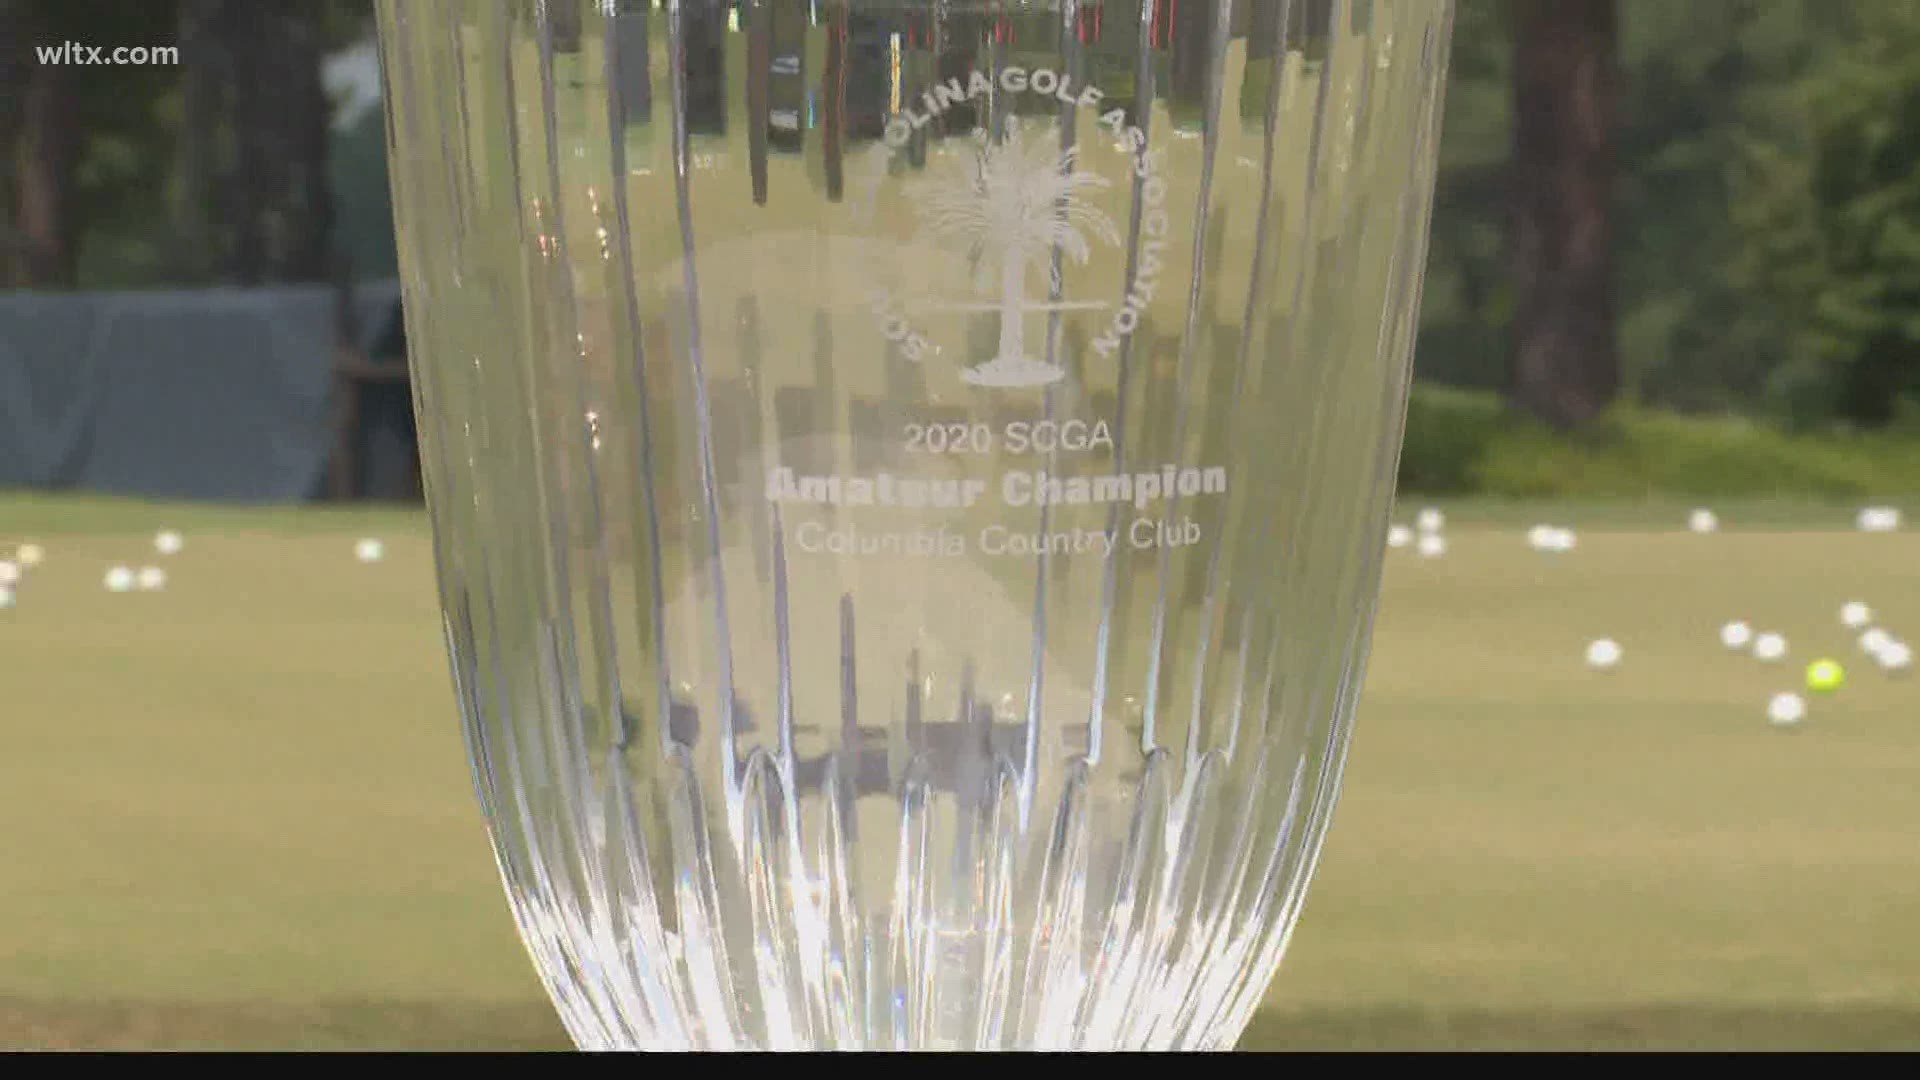 The 89th annual SCGA amateur championship was held at the Columbia Country Club in Blythewood.